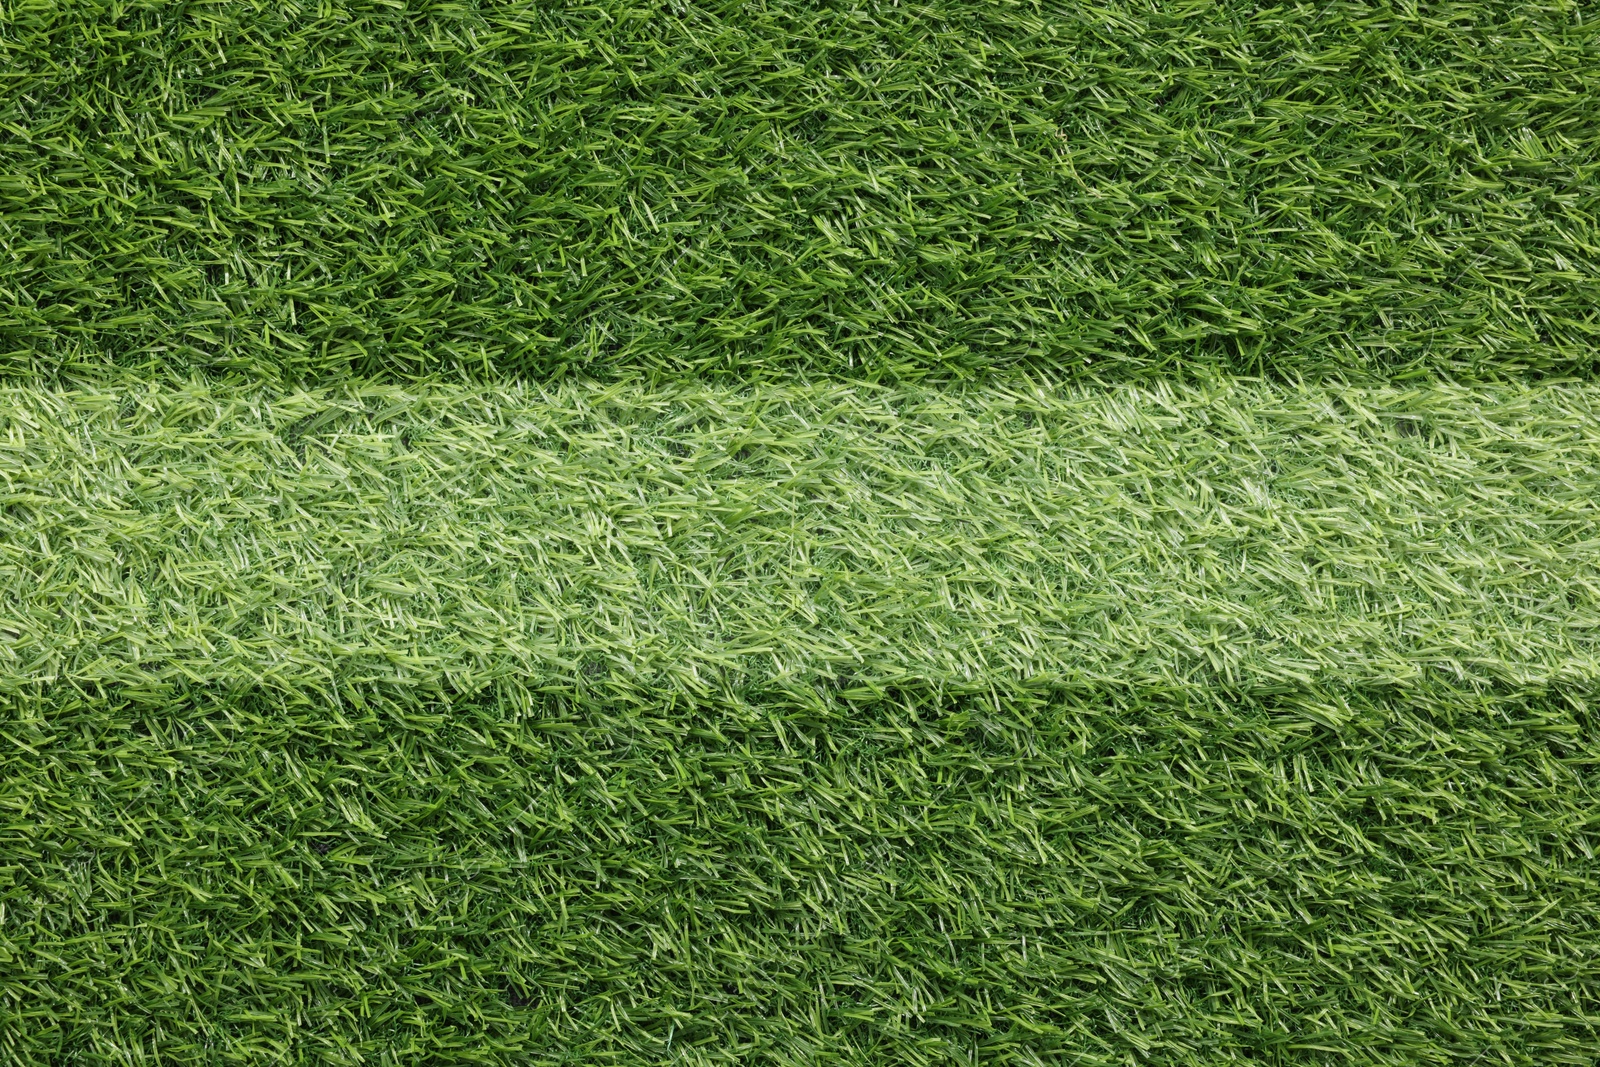 Image of Green grass with white marking, top view